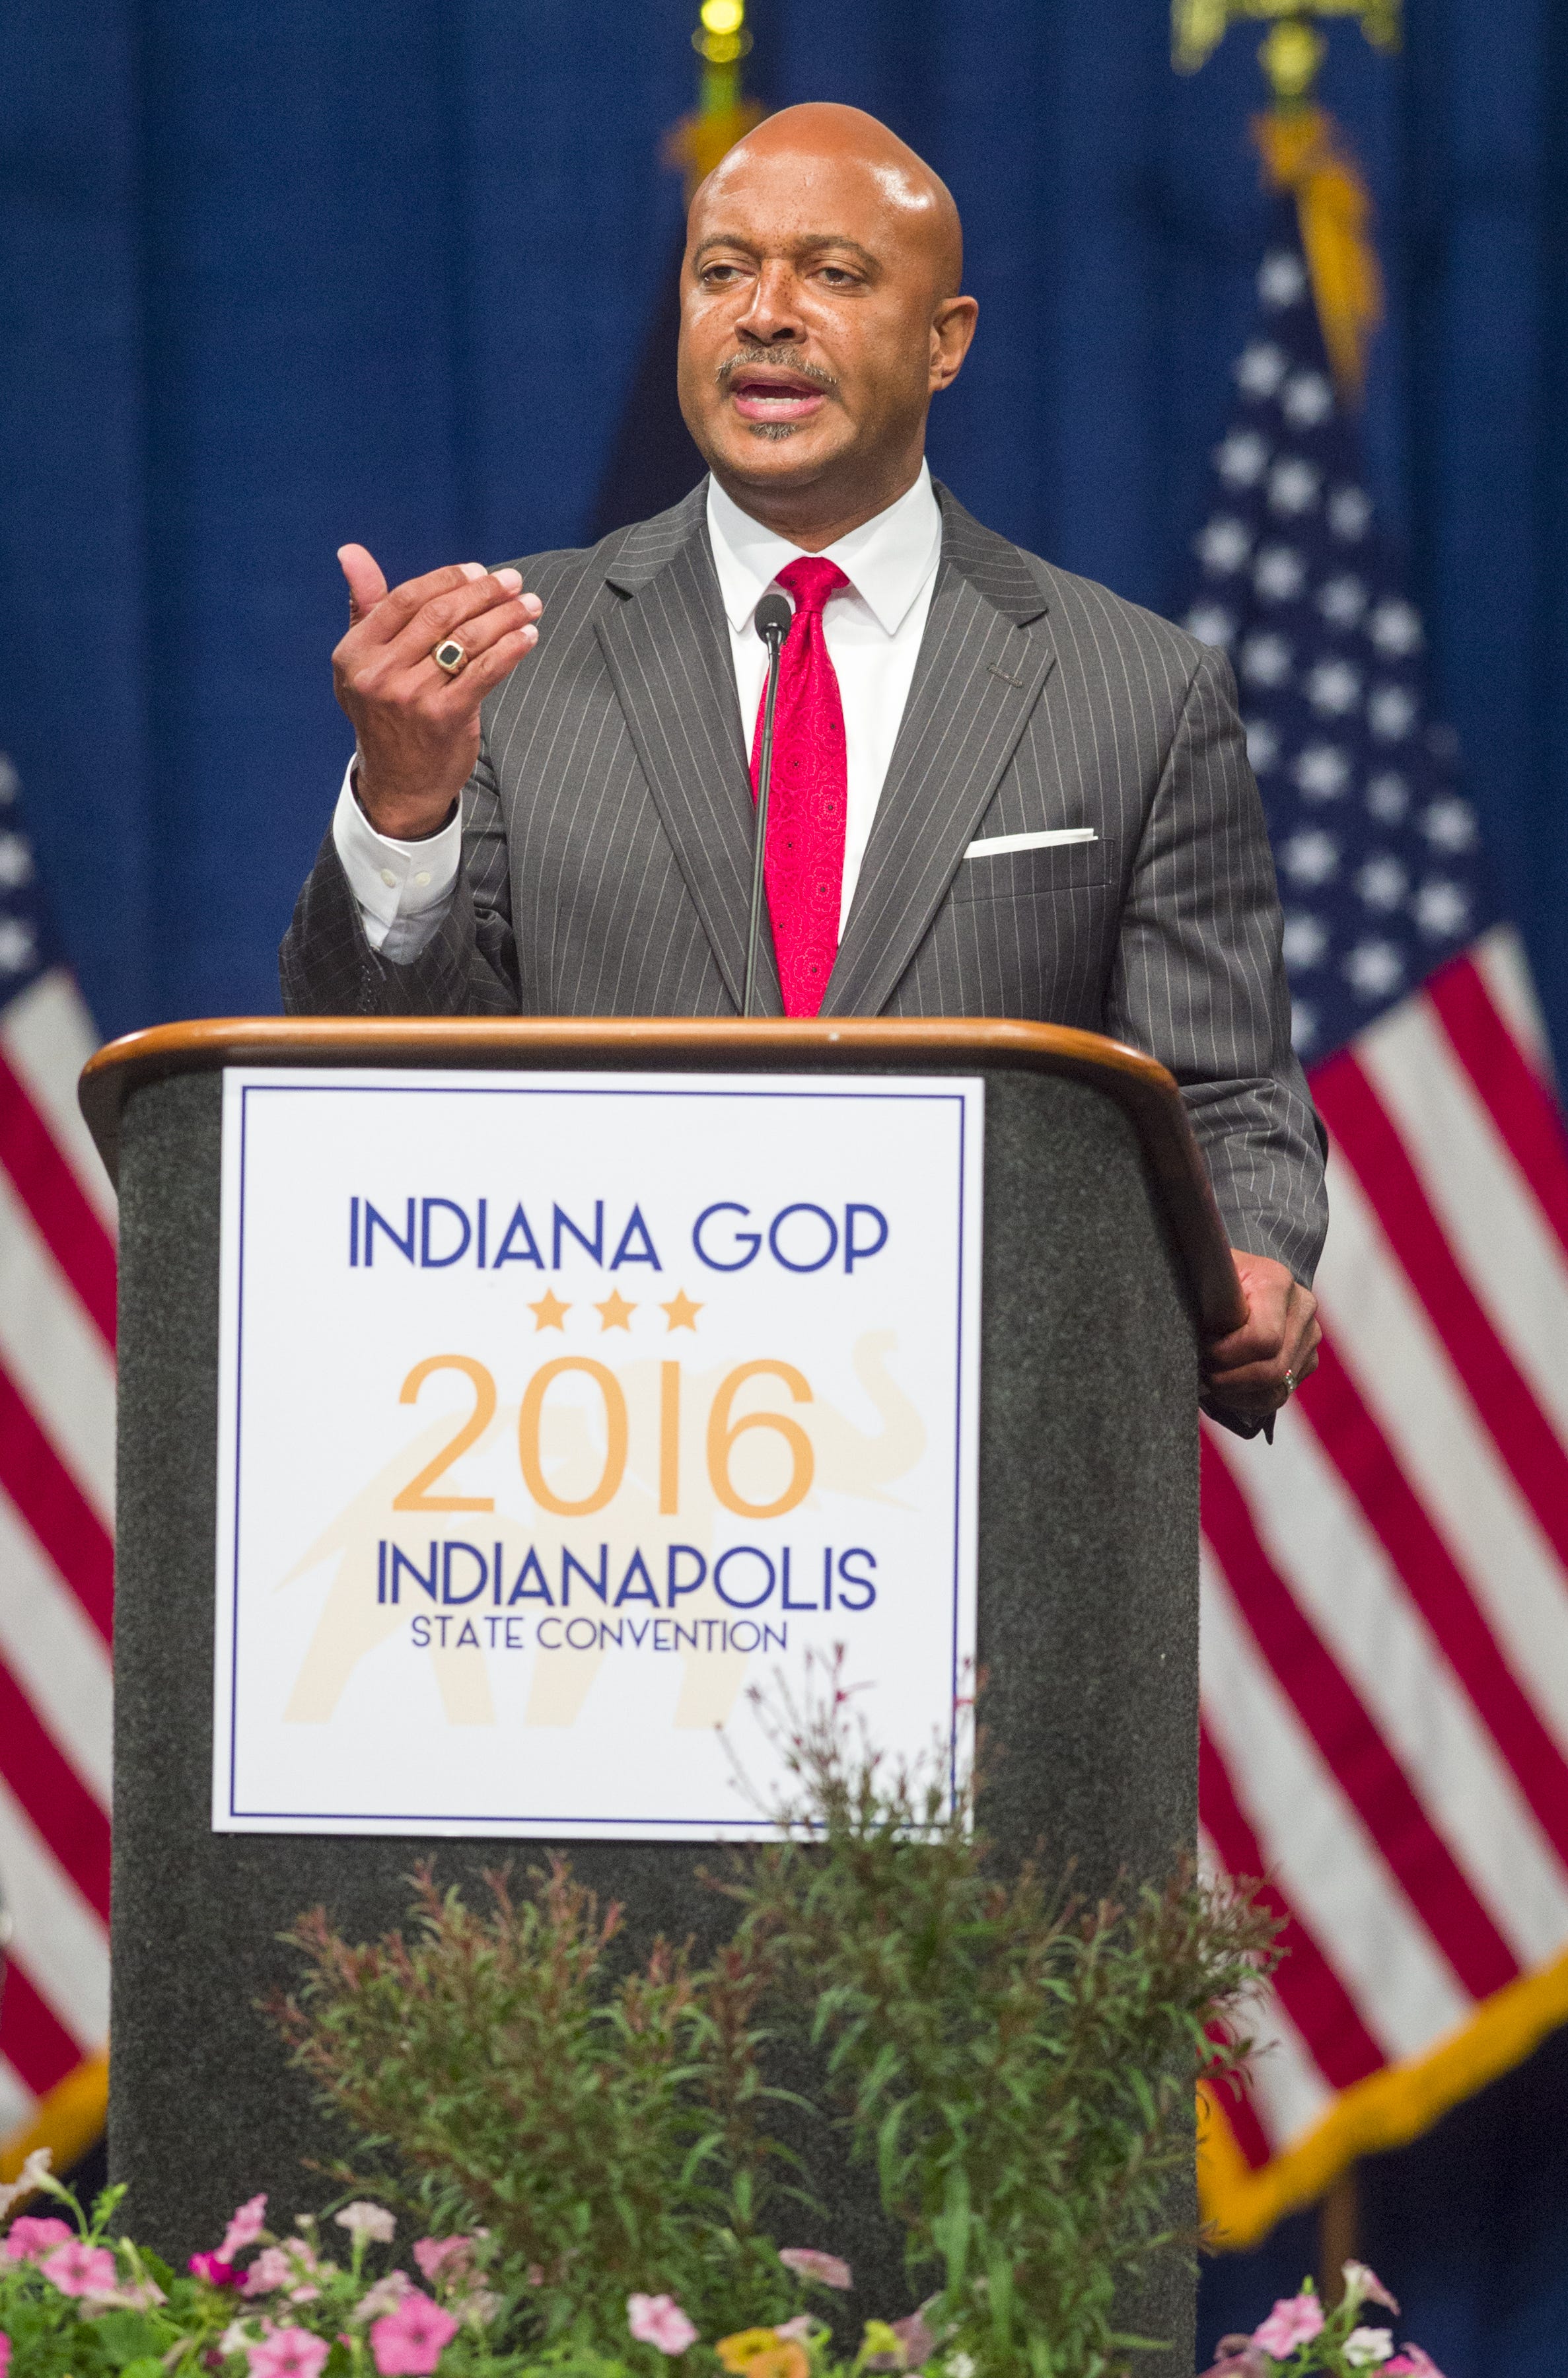 Indiana Republican Party snubs Attorney General Curtis Hill at Mike Pence event